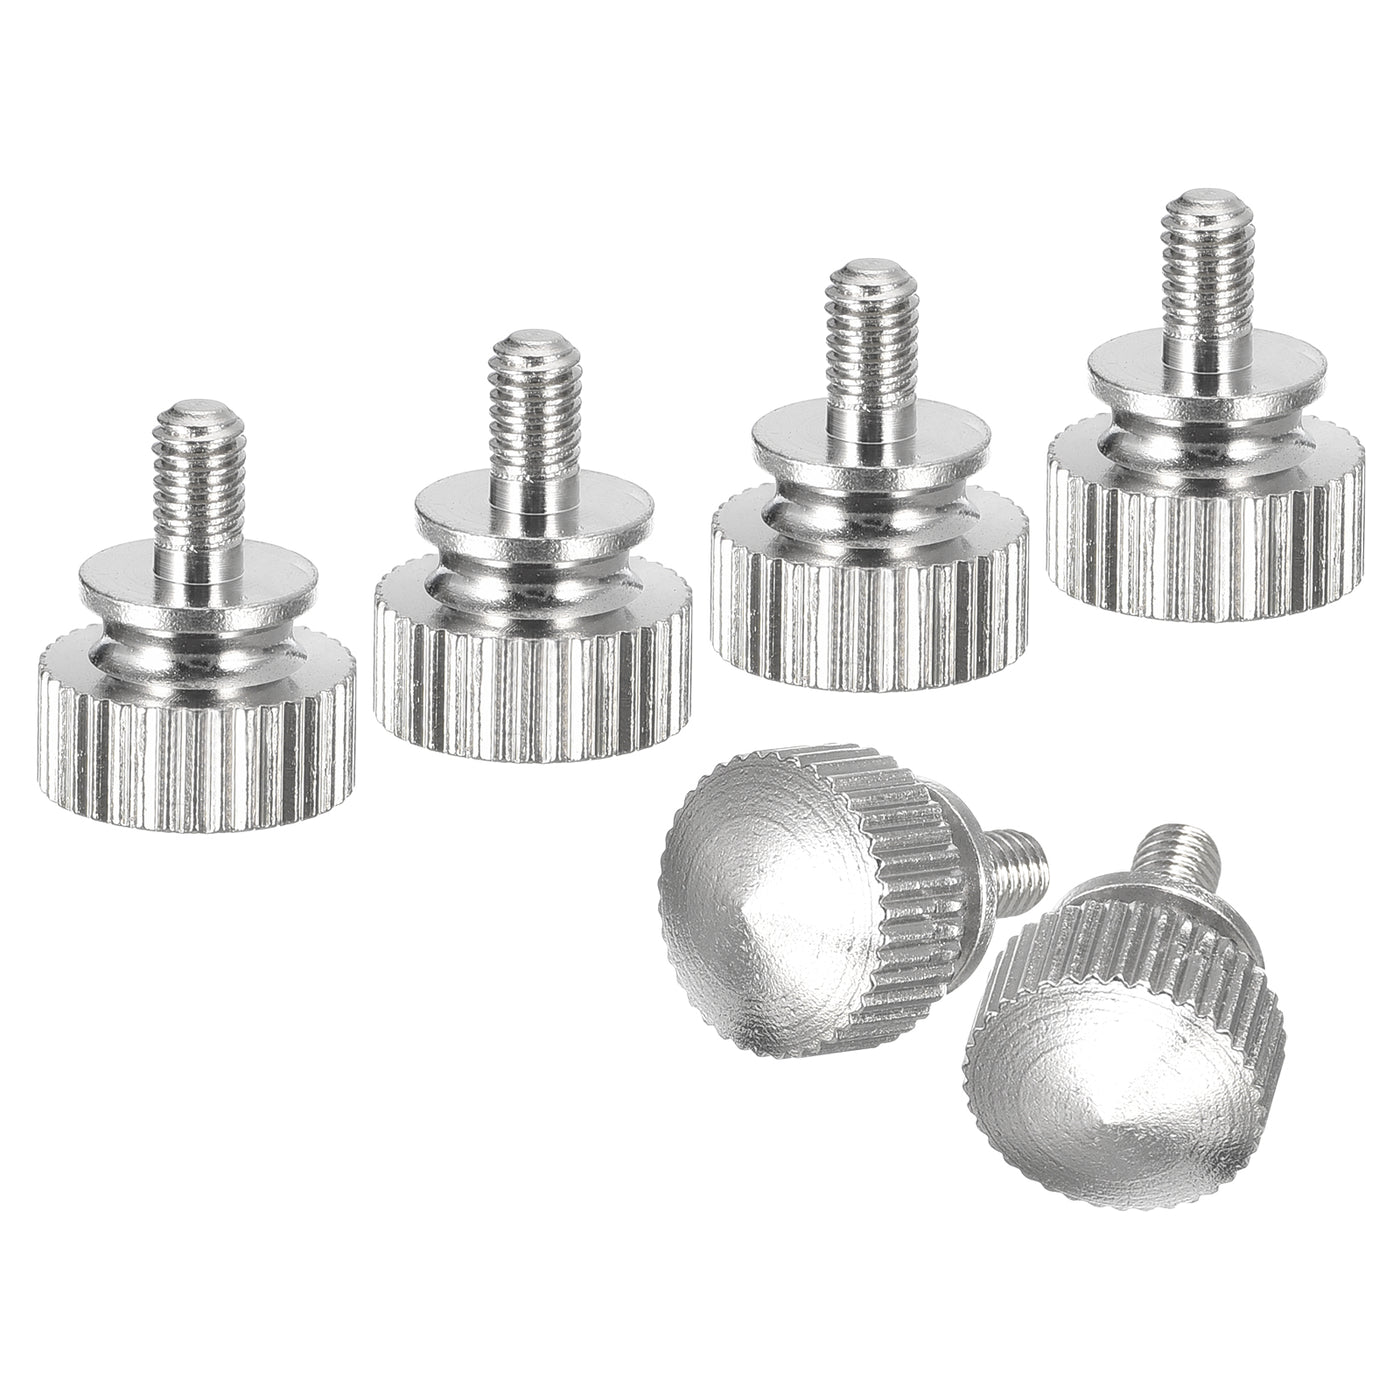 uxcell Uxcell M3x5mm Knurled Thumb Screws, 6pcs Brass Thumb Screws with Shoulder, Silver Tone